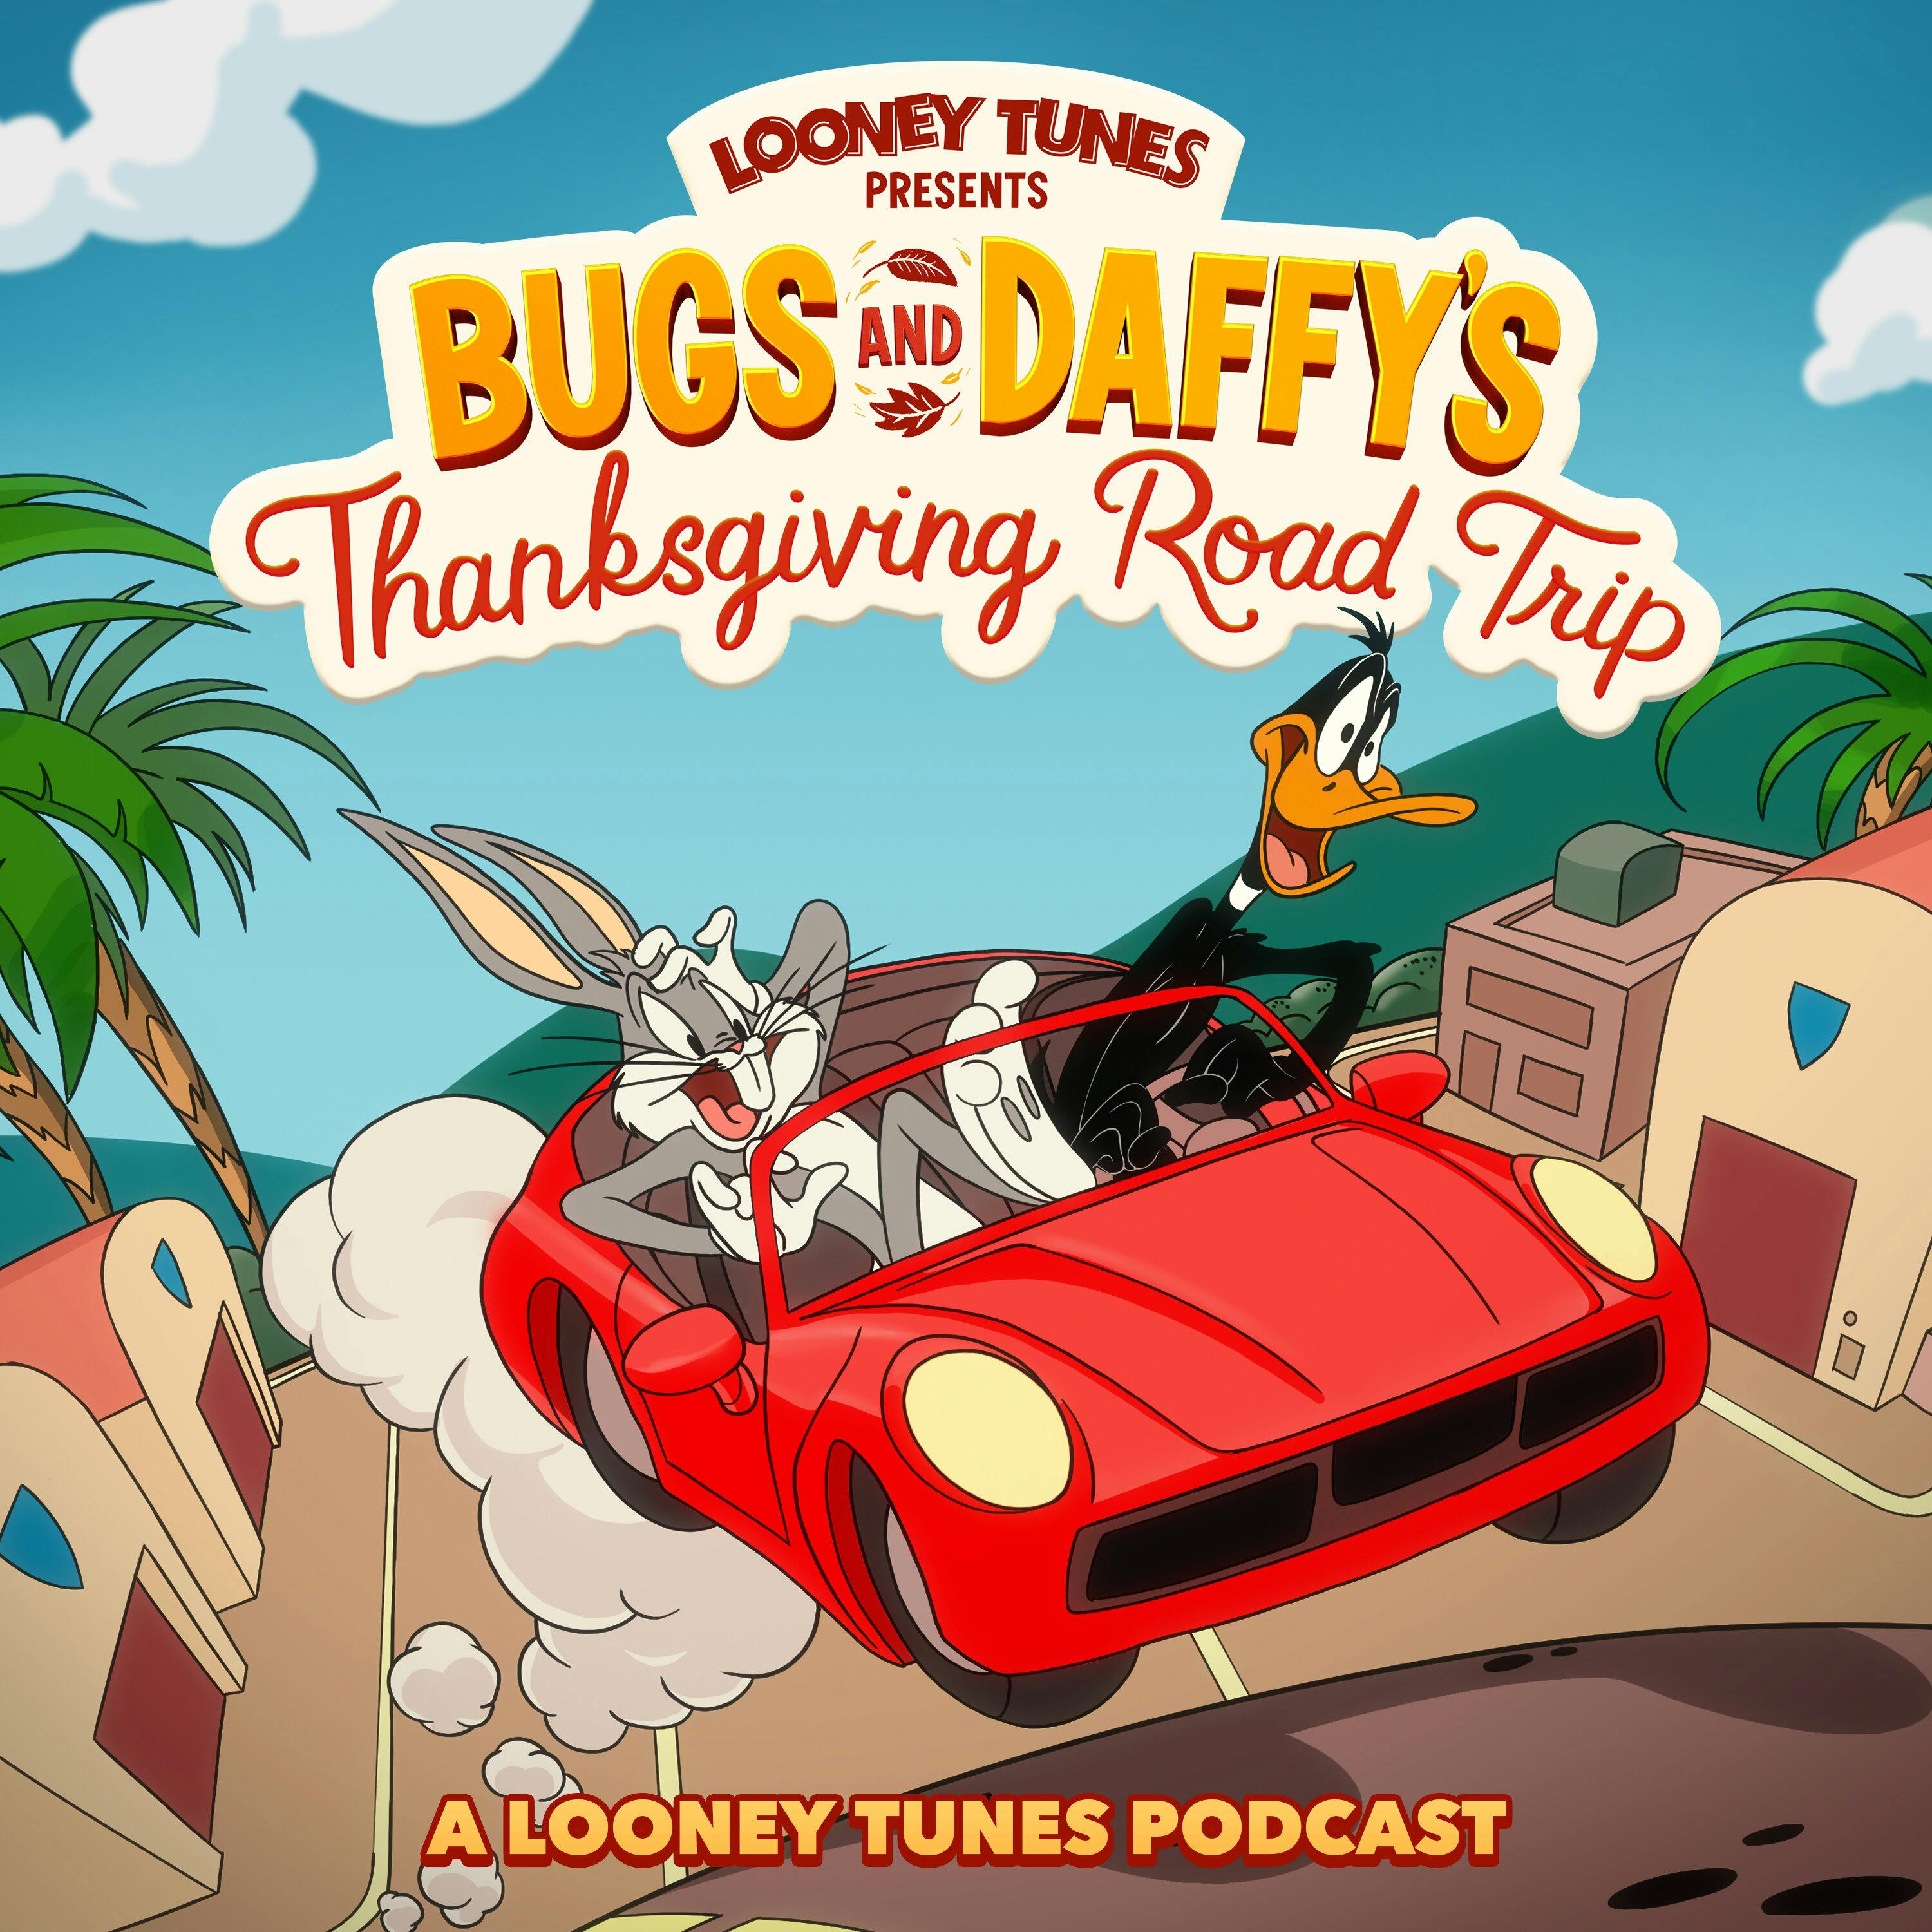 Looney Tunes Presents - Bugs & Daffy’s Thanksgiving Road Trip podcast show image